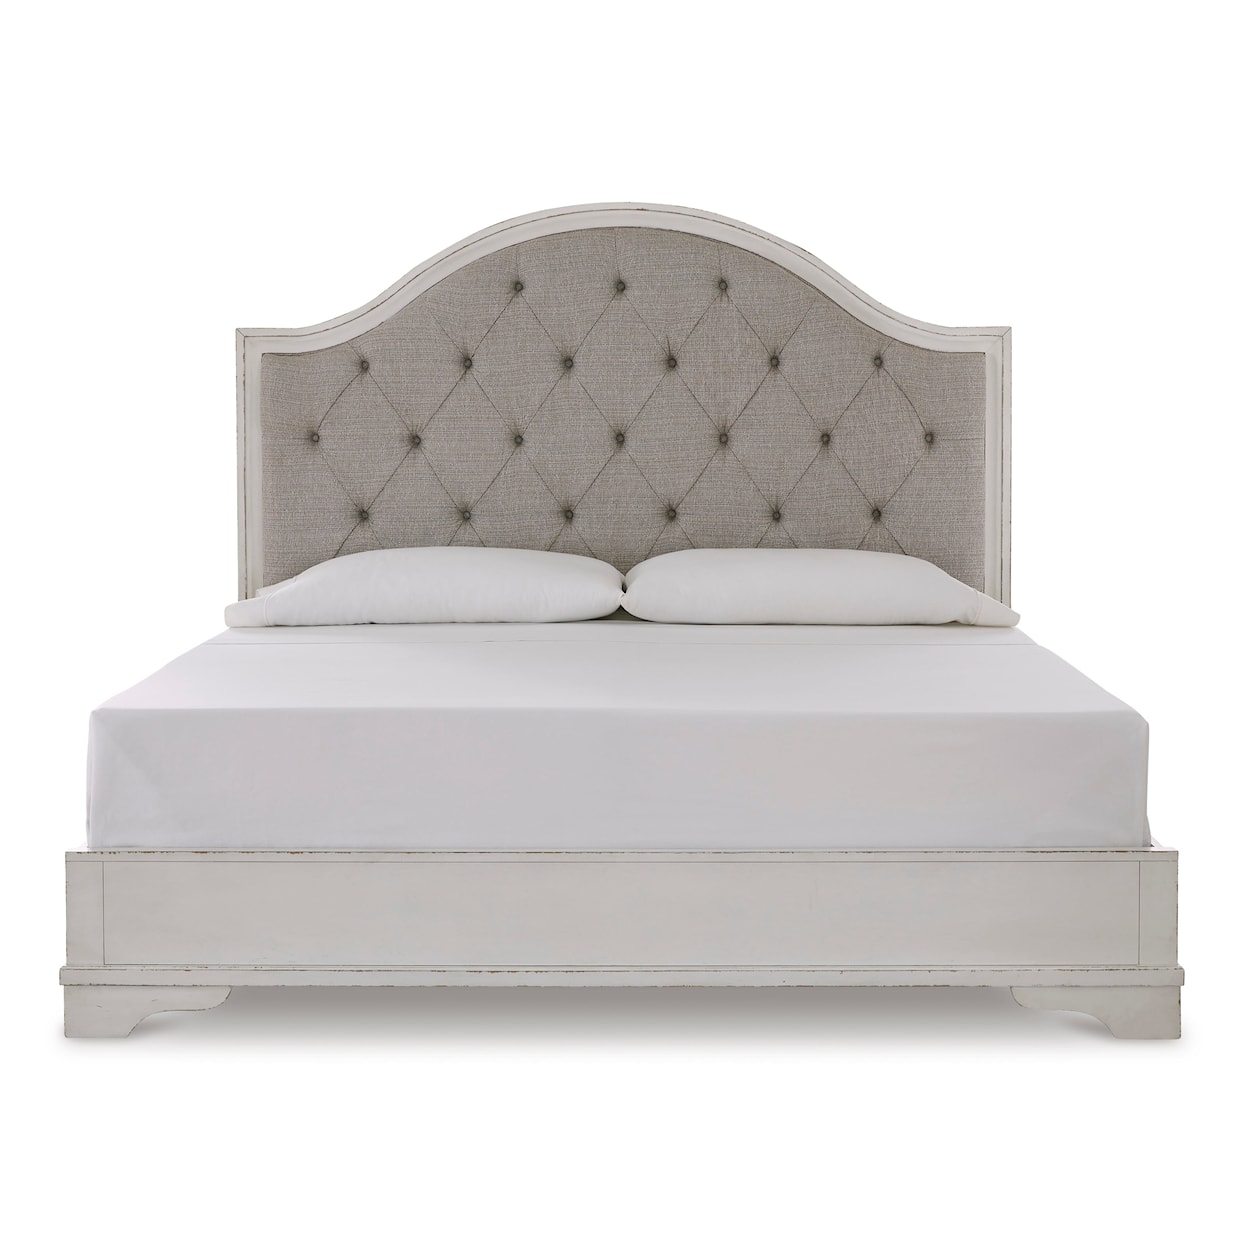 Signature Design by Ashley Brollyn King Bed